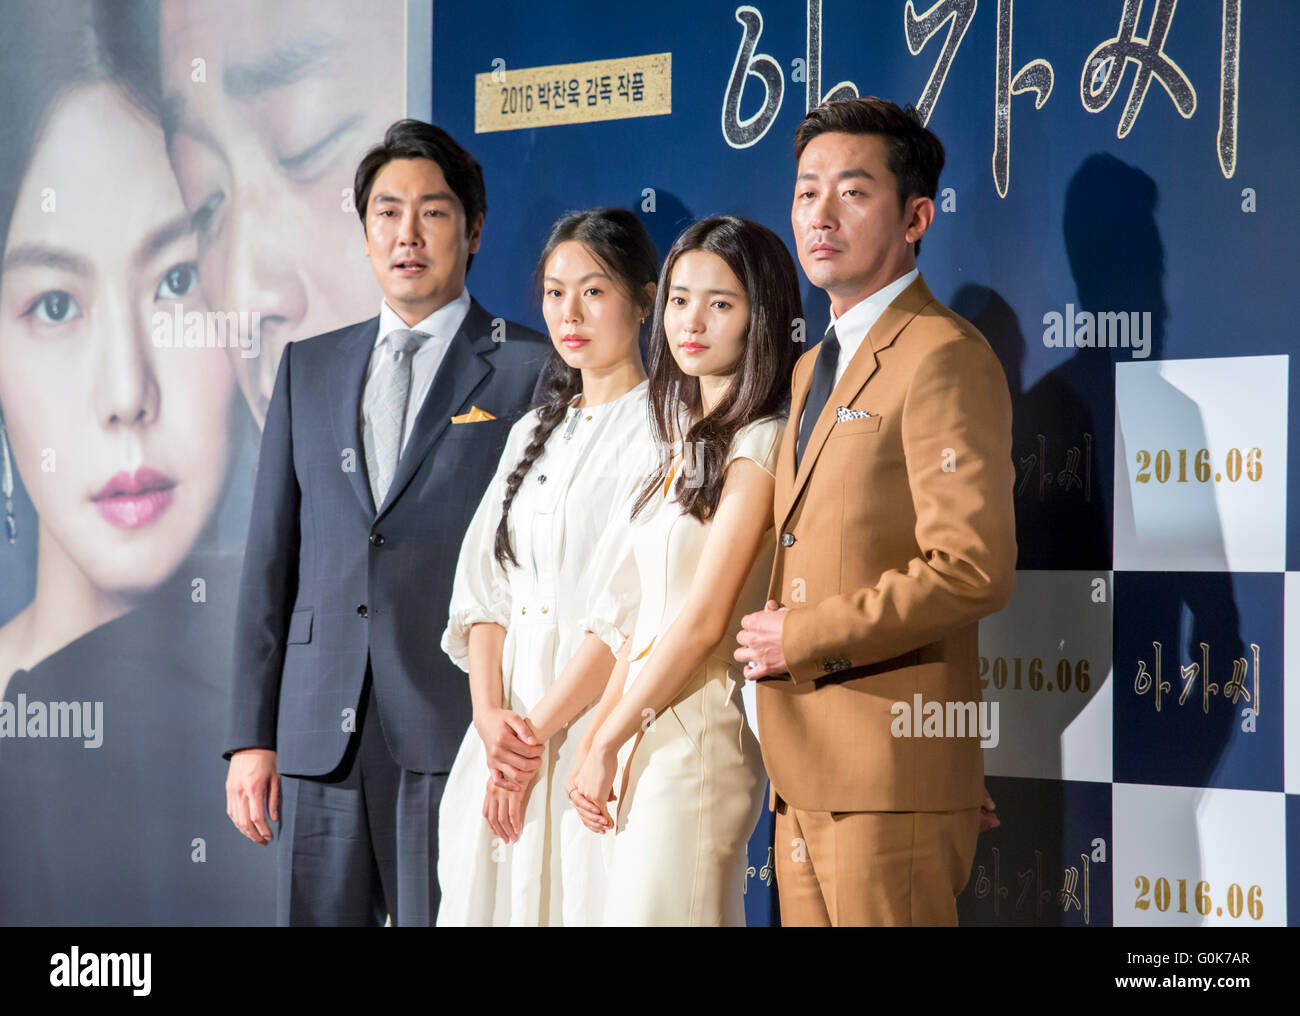 Seoul, South Korea. 2nd May, 2016. Cast members (L-R) Cho Jin-woong, Kim Min-hee, Kim Tae-ri and Ha Jung-woo pose during a press conference for their film, 'The Handmaiden' in Seoul, South Korea. The thriller was invited for the main competition category of the 69th Cannes Film Festival which will be held in Cannes from May 11-22. The movie was adapted from Sarah Waters' novel Fingersmith. Credit:  Lee Jae-Won/AFLO/Alamy Live News Stock Photo